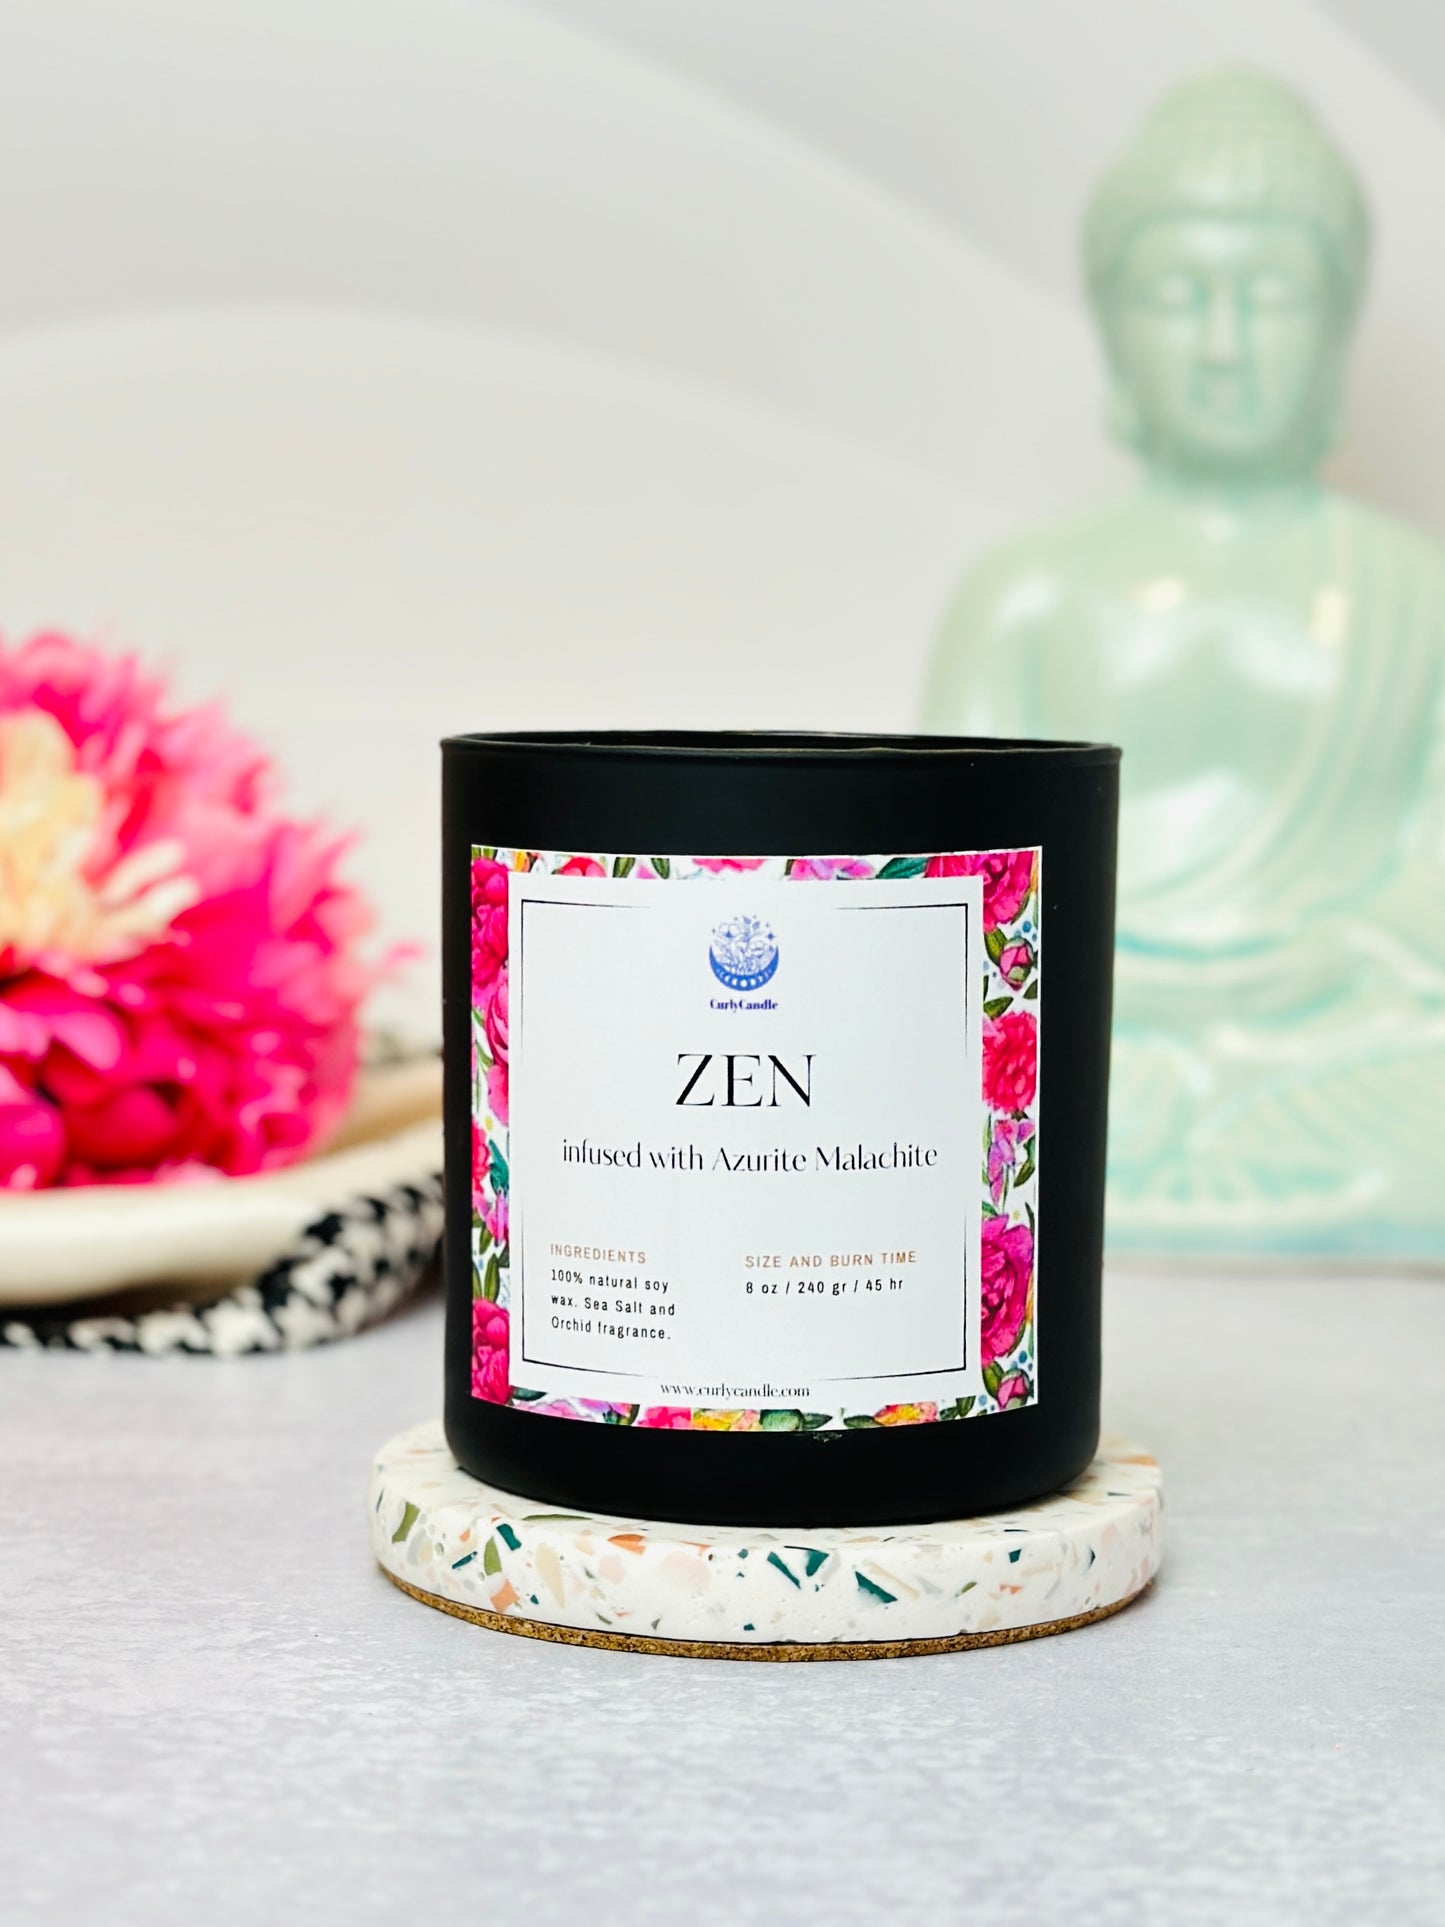 Zen soy candle with Azurite Malachite crystal